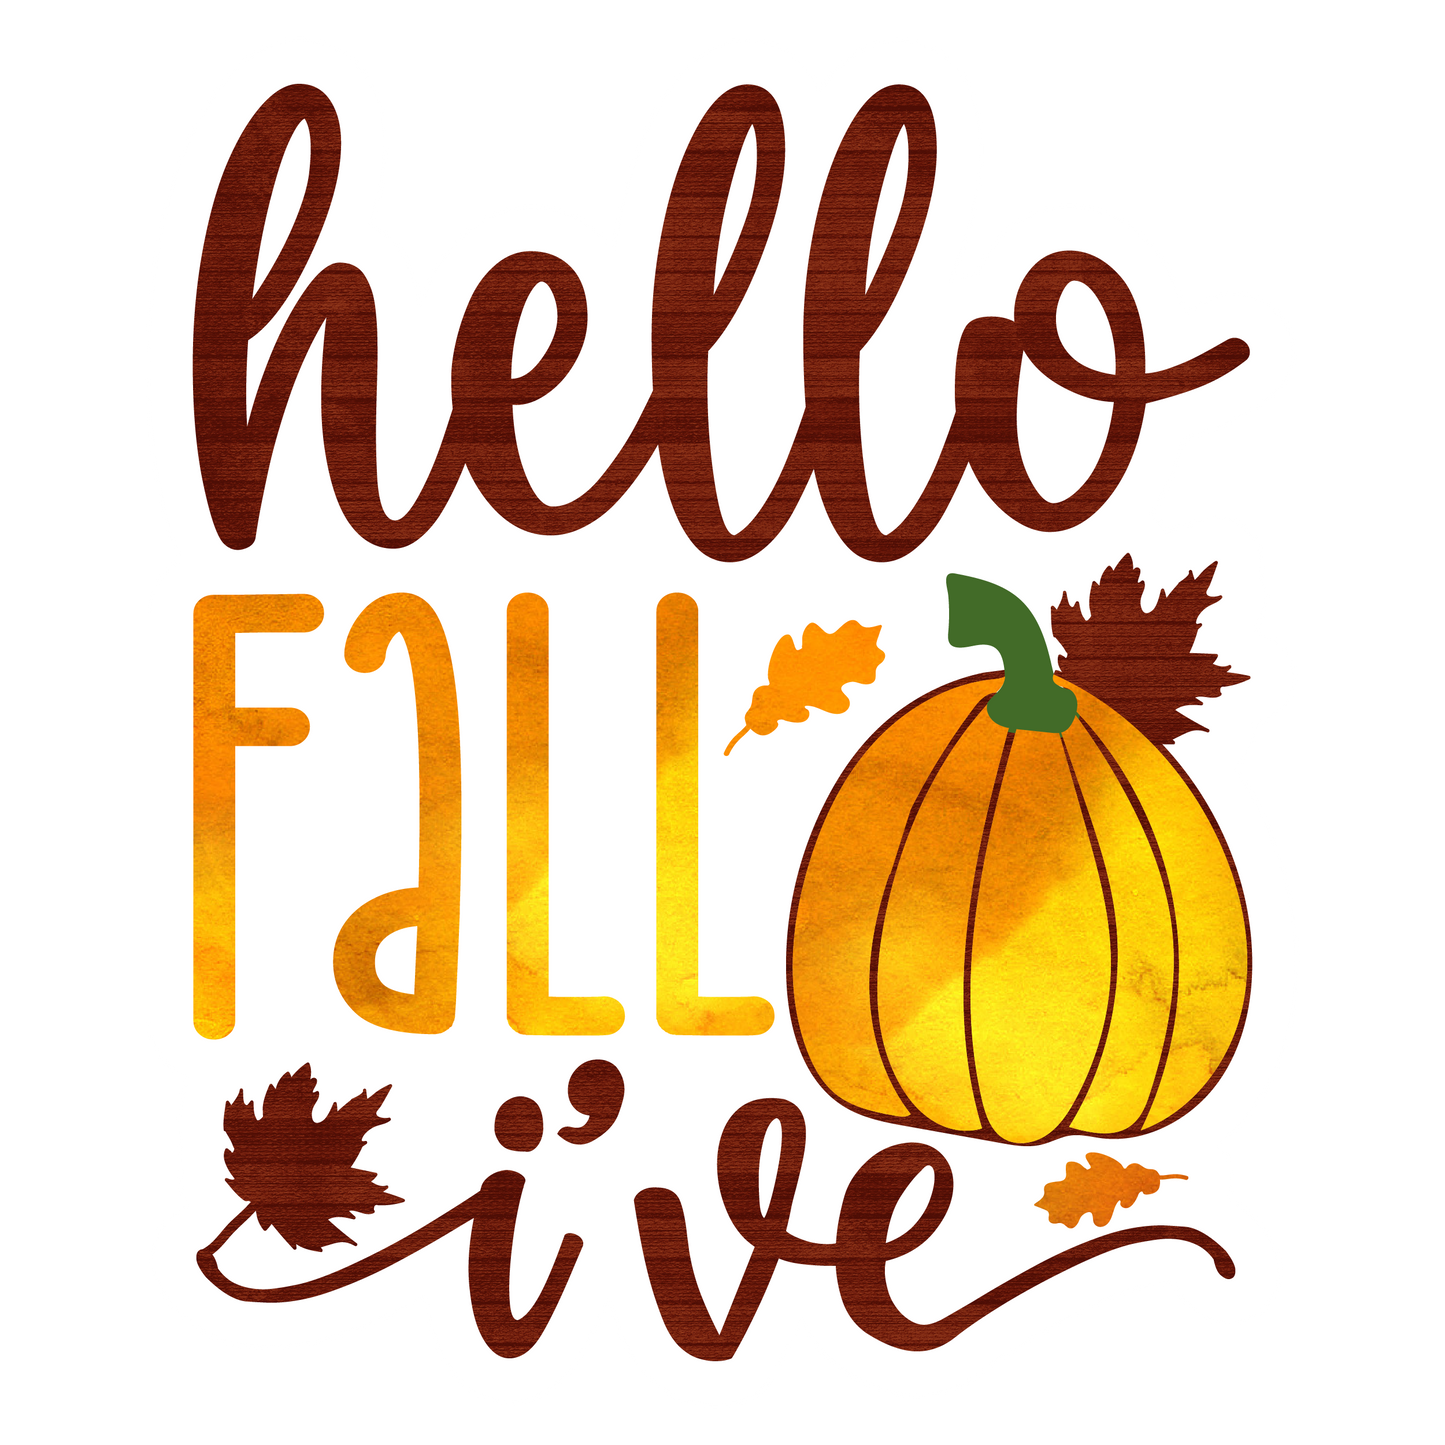 Inspirational Quote Hello Fall I've Motivational Sticker Vinyl Decal Motivation Stickers- 5" Vinyl Sticker Waterproof